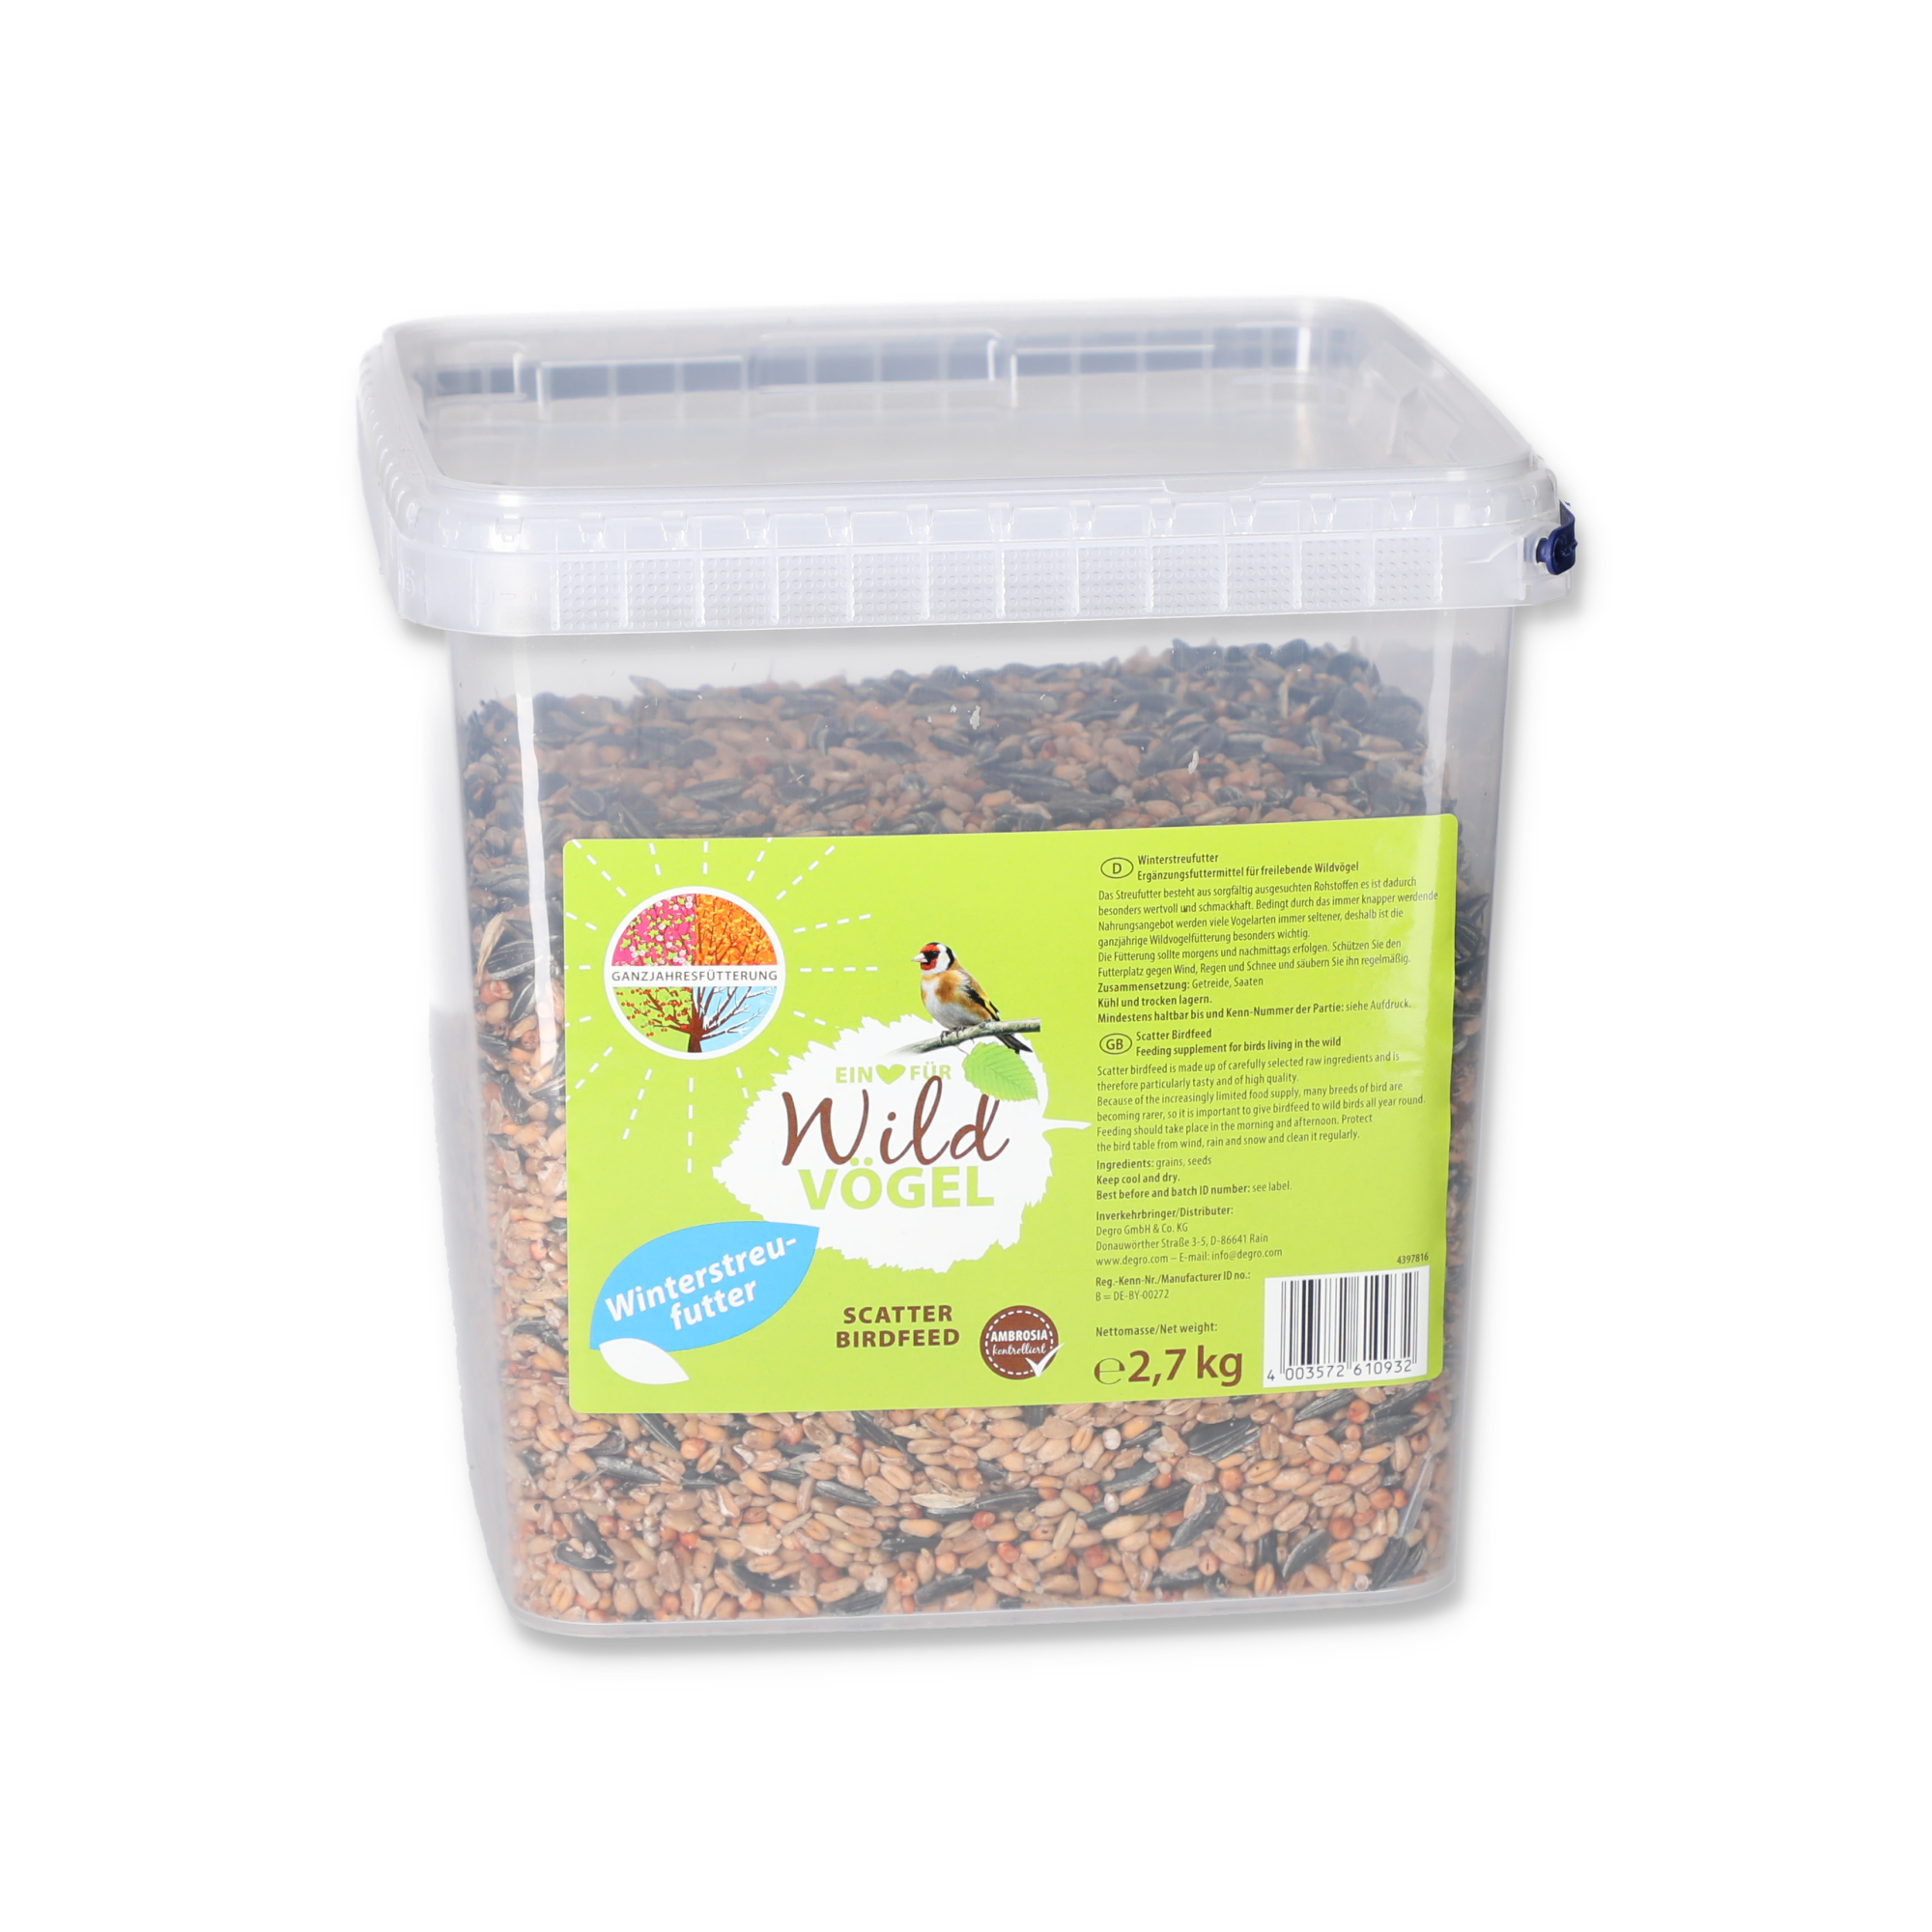 Wildvogelfutter Eimer 2,7 kg + product picture